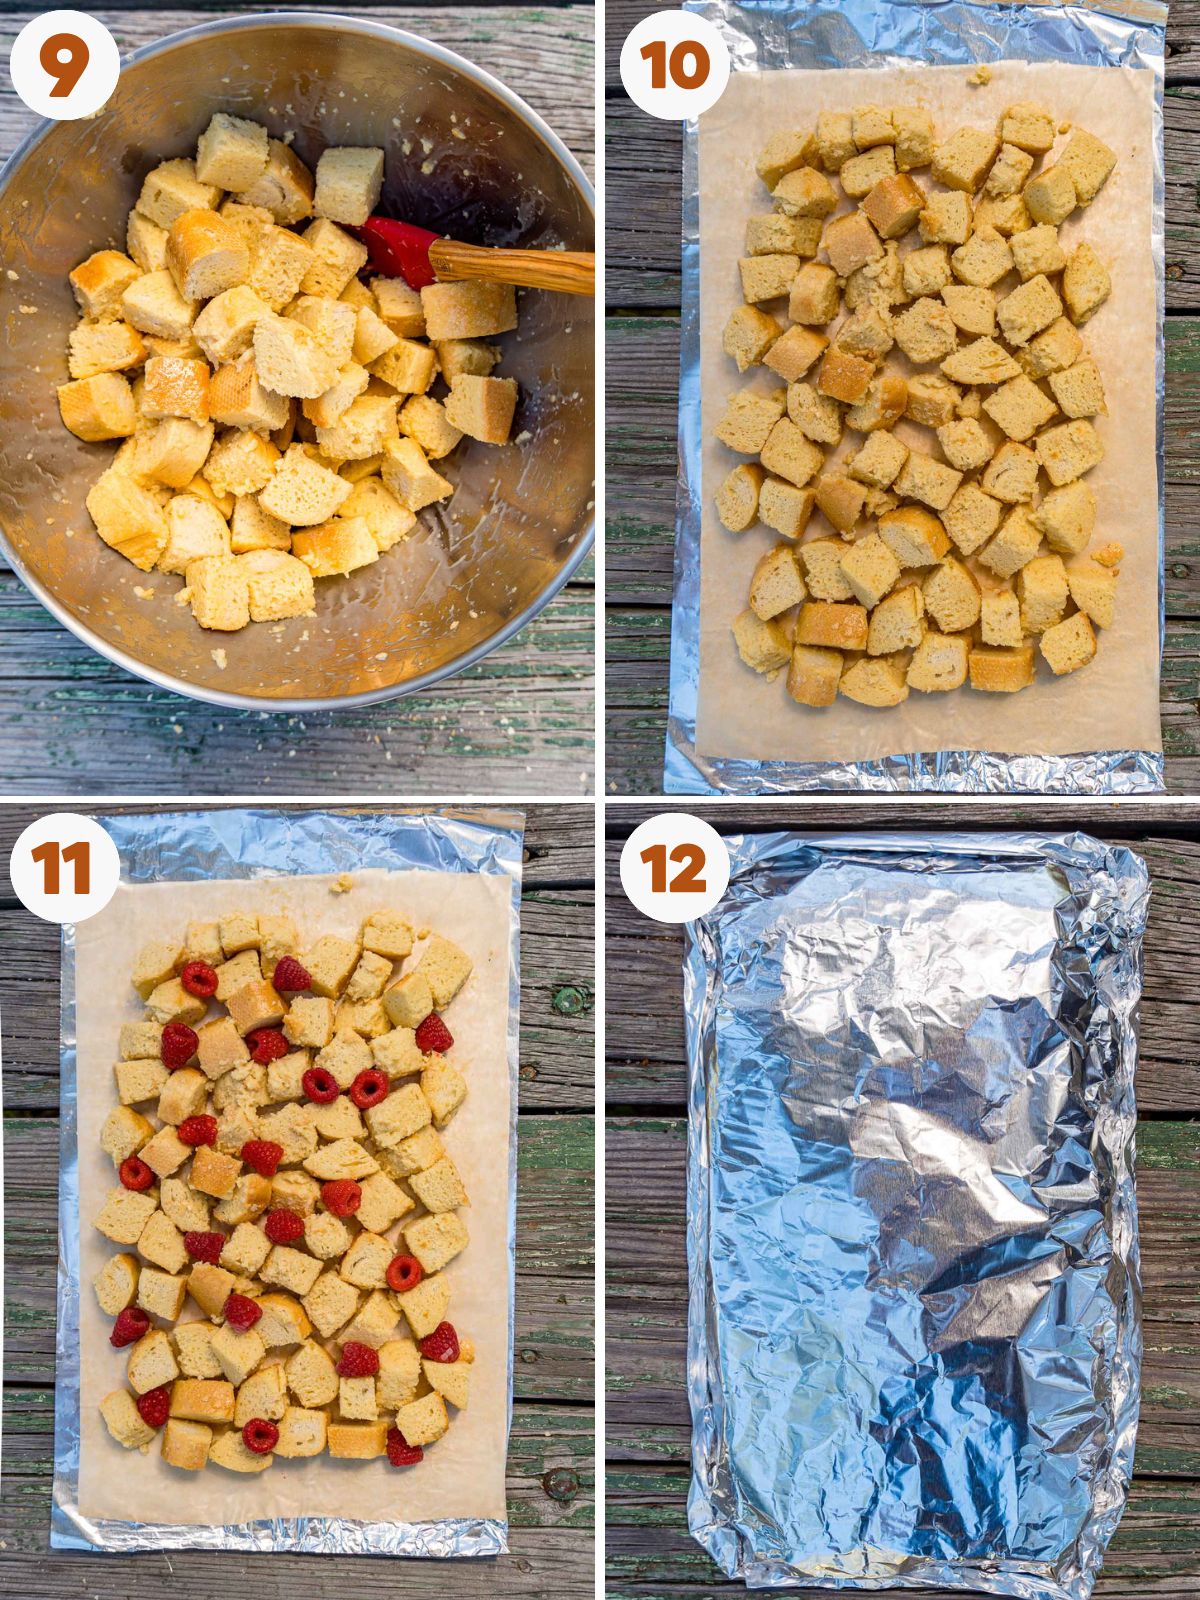 Steps to make foil packet french toast